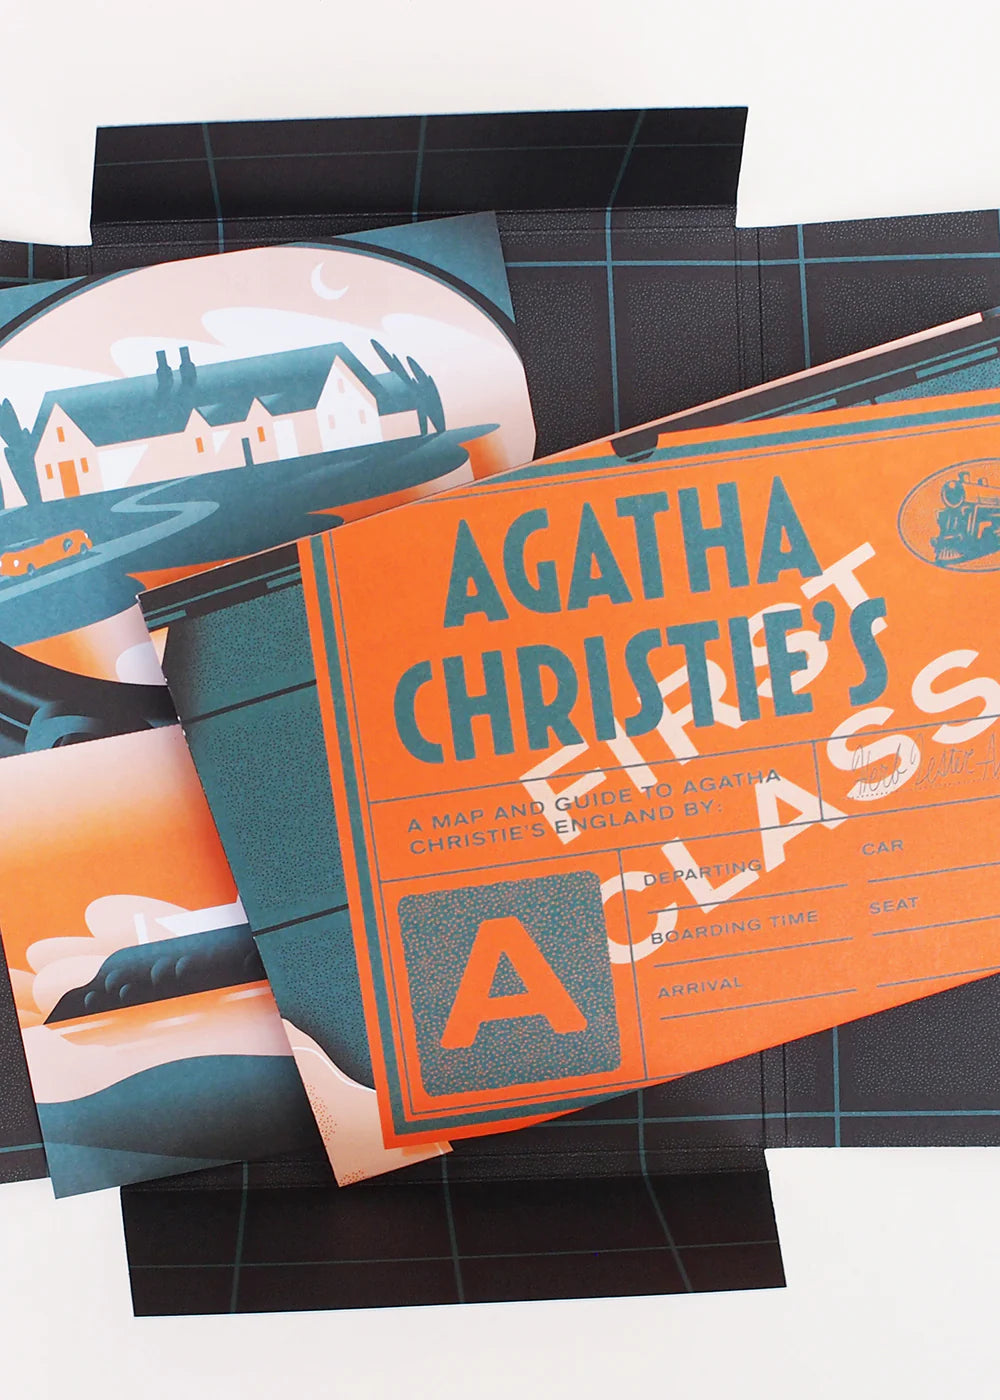 Agatha Christie's - A map and guide from England